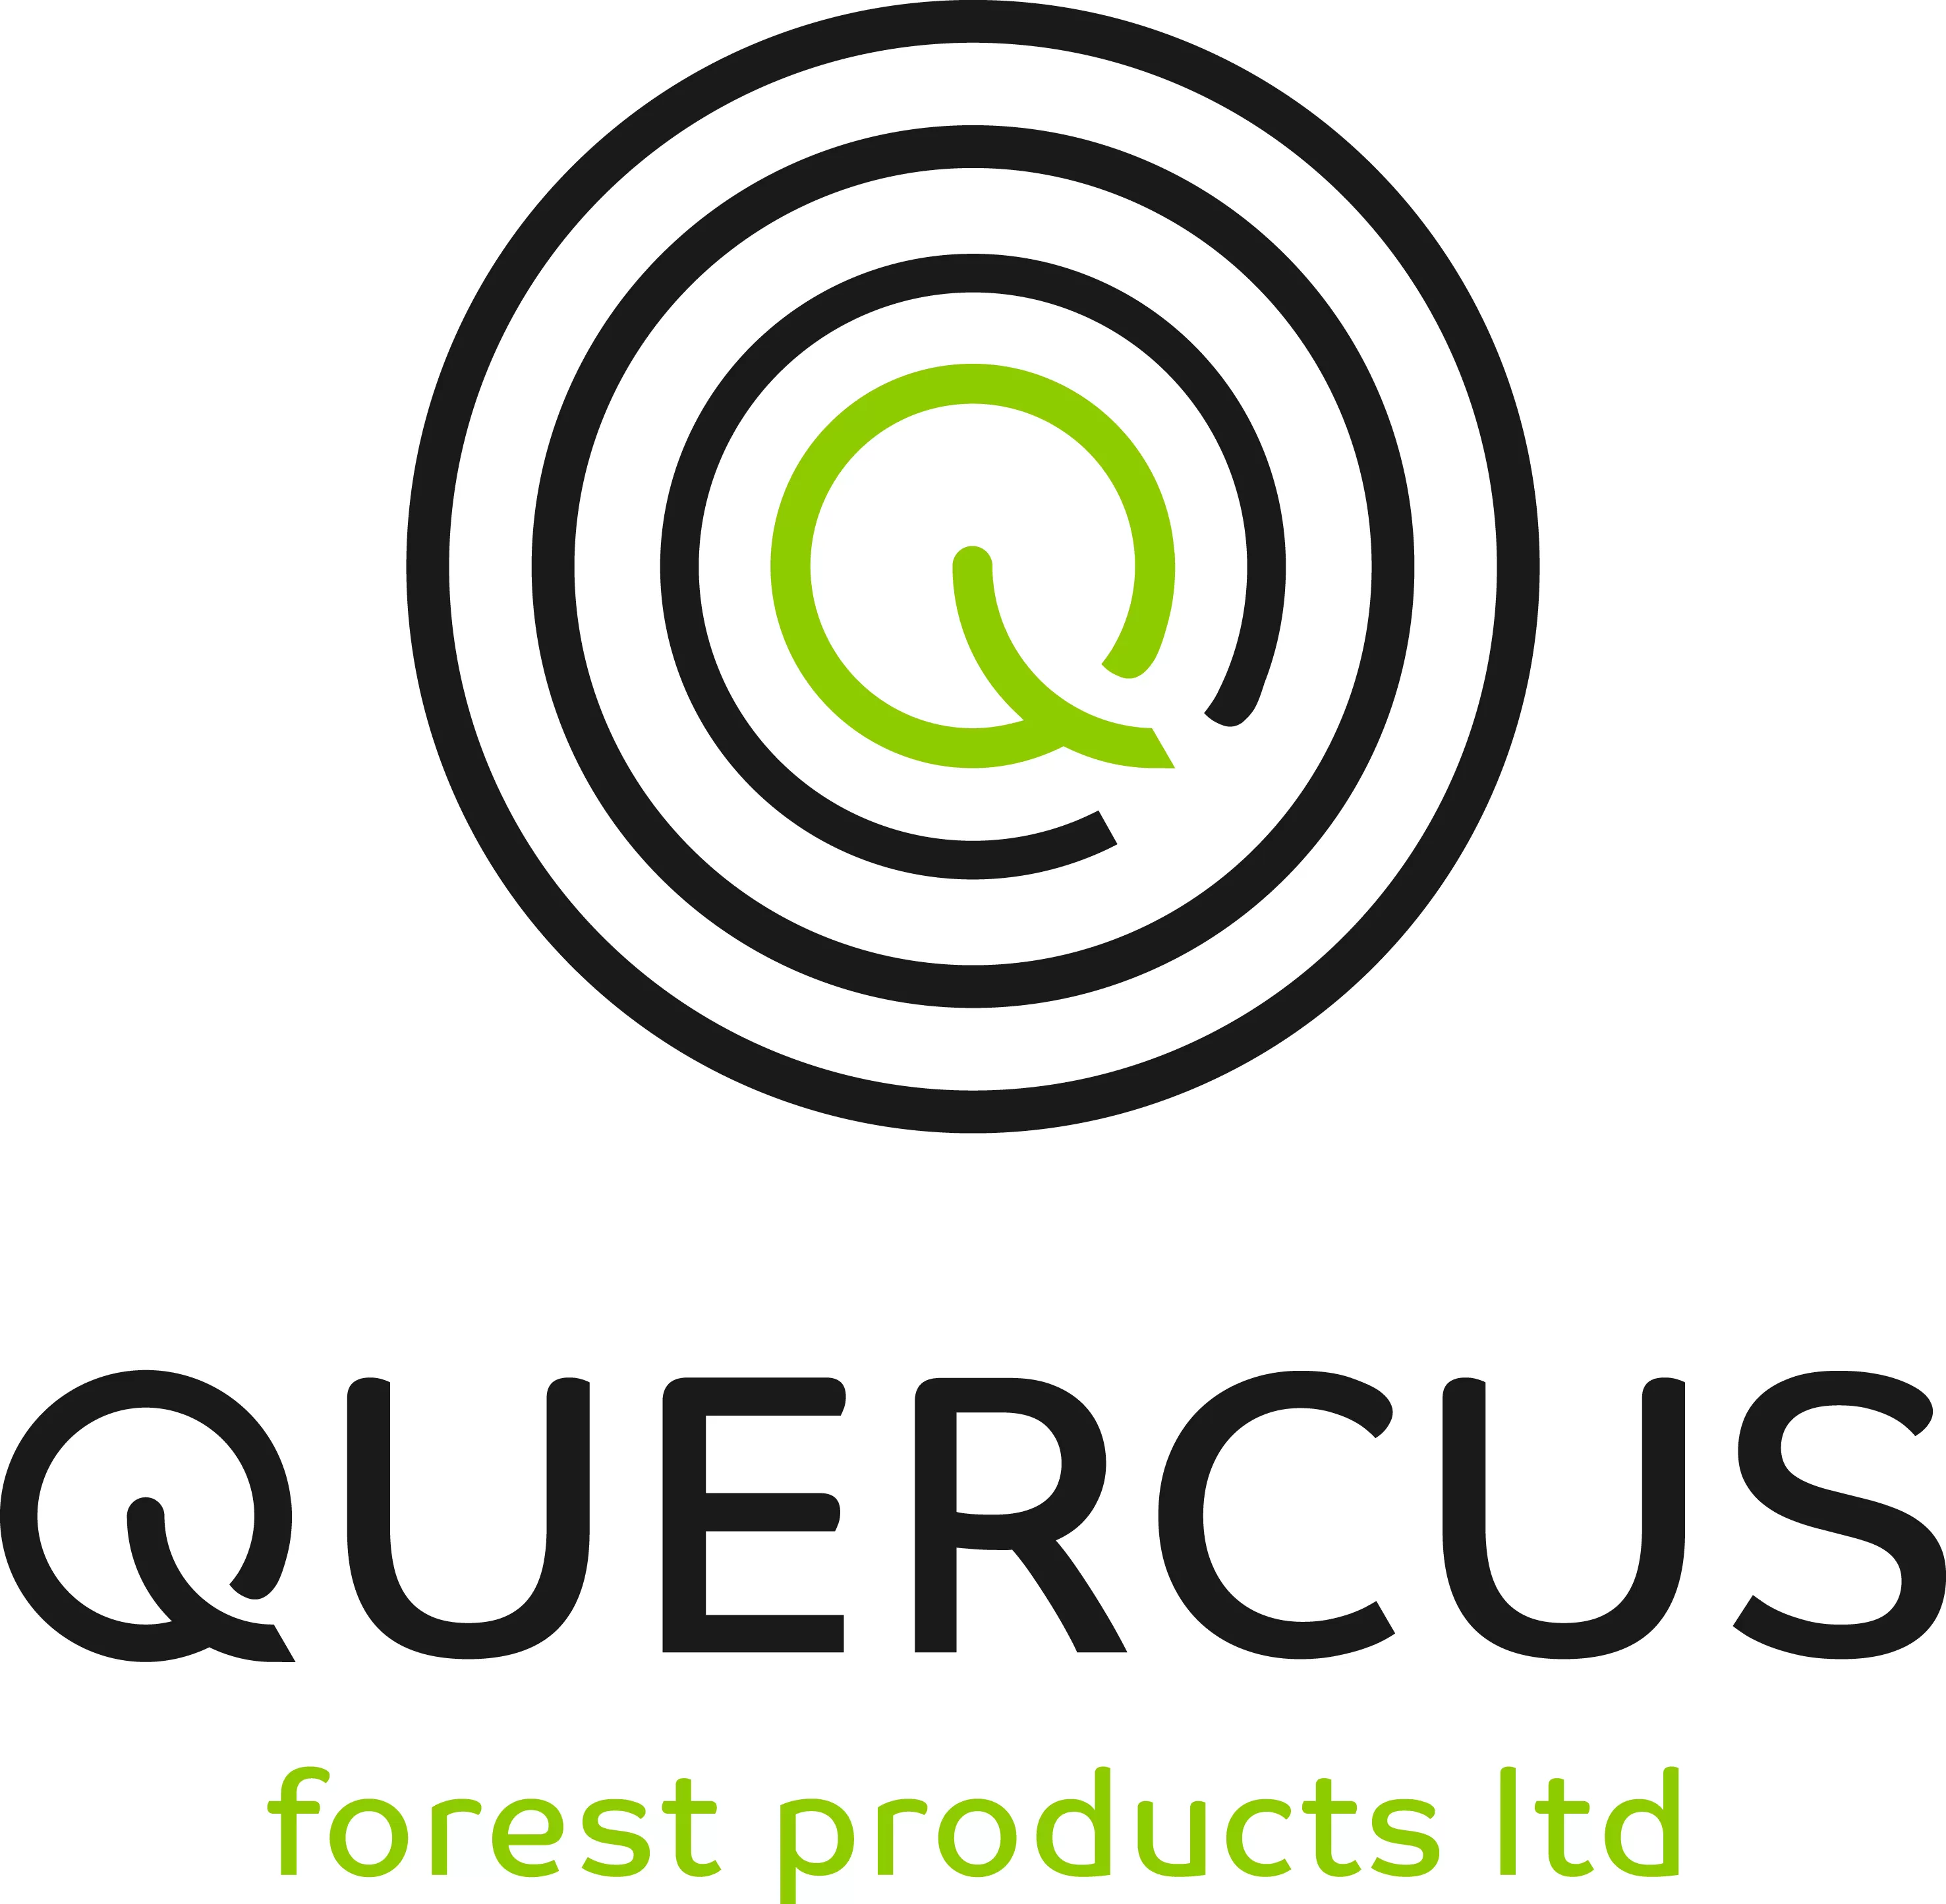 Quercus Forest Products Limited logo